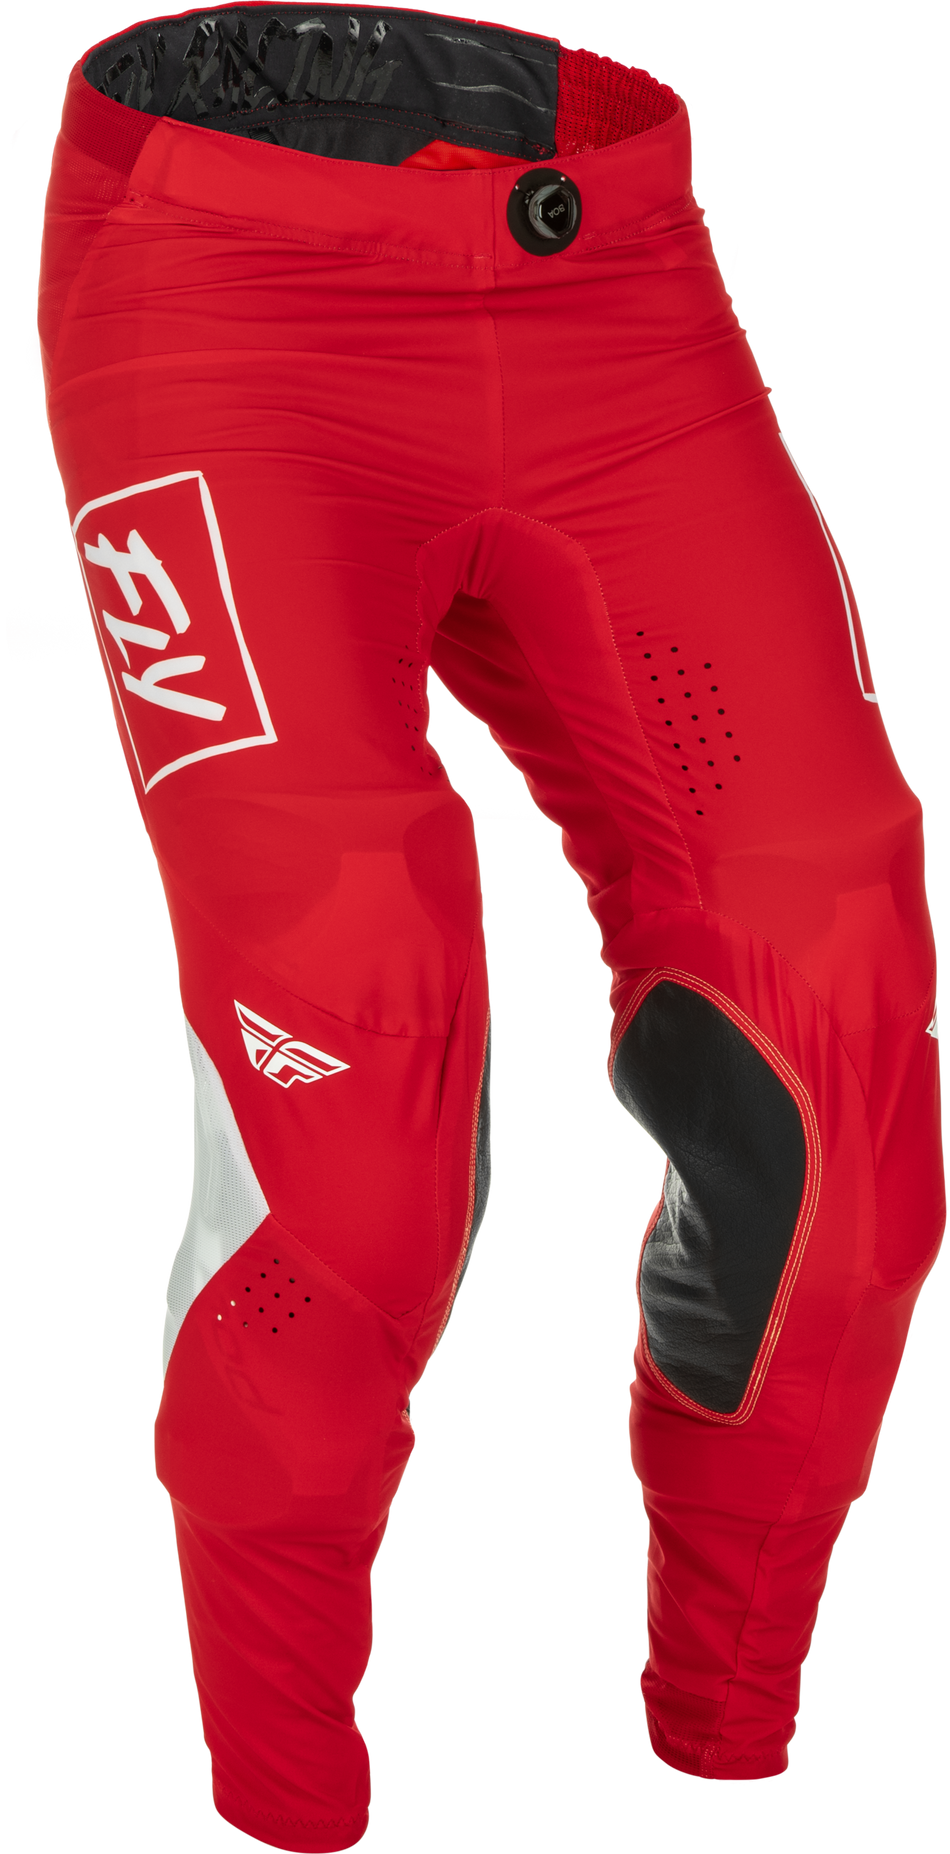 FLY RACING Lite Pants Red/White Size 38 375-73238